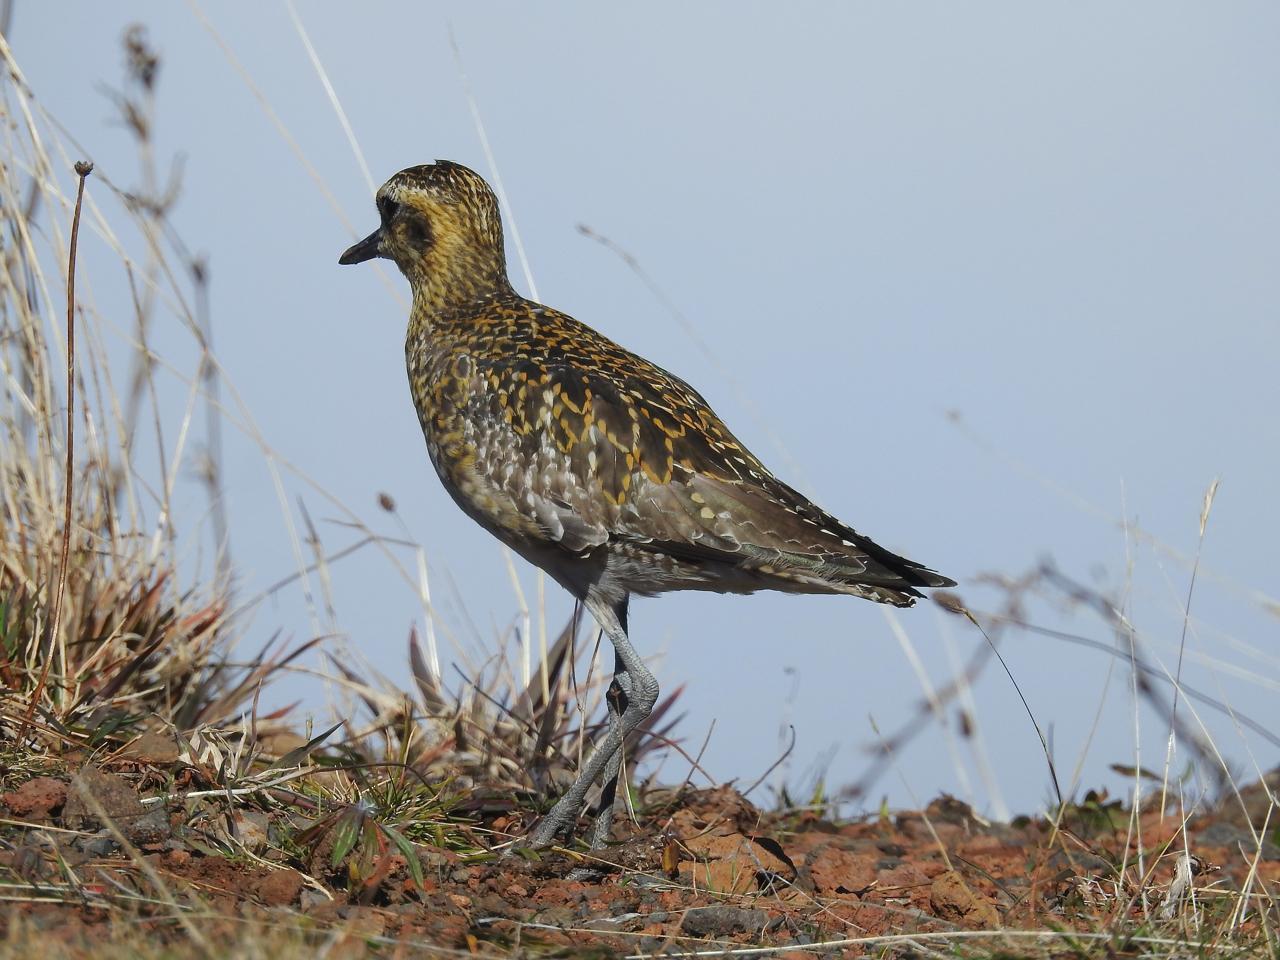 Pacific Golden-Plover Photo by Brian Avent